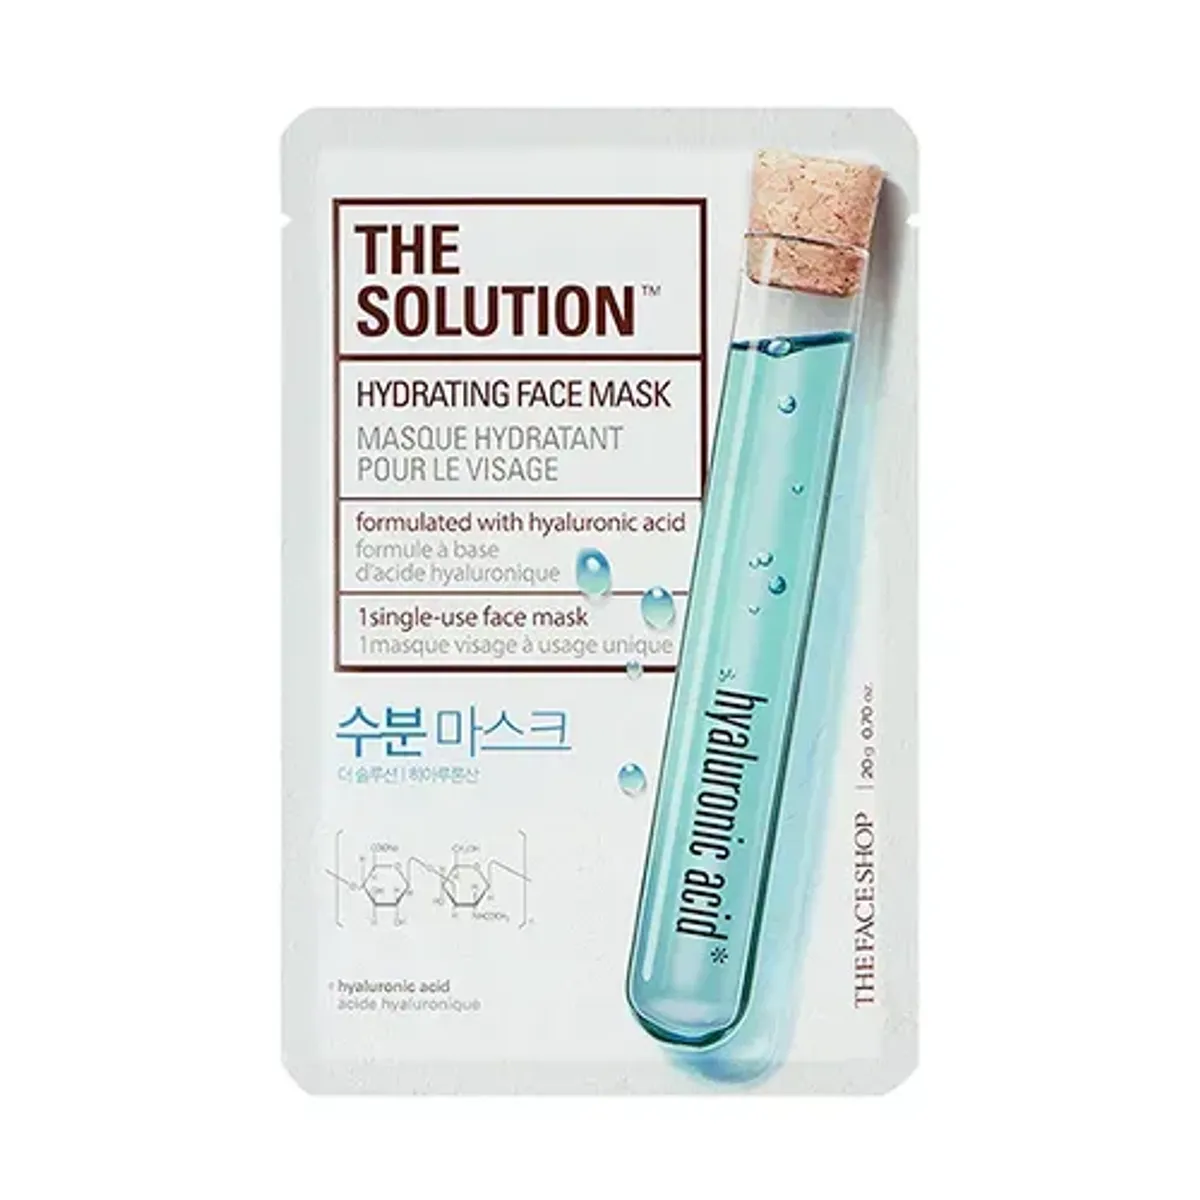 the-solution-hydrating-face-mask-1